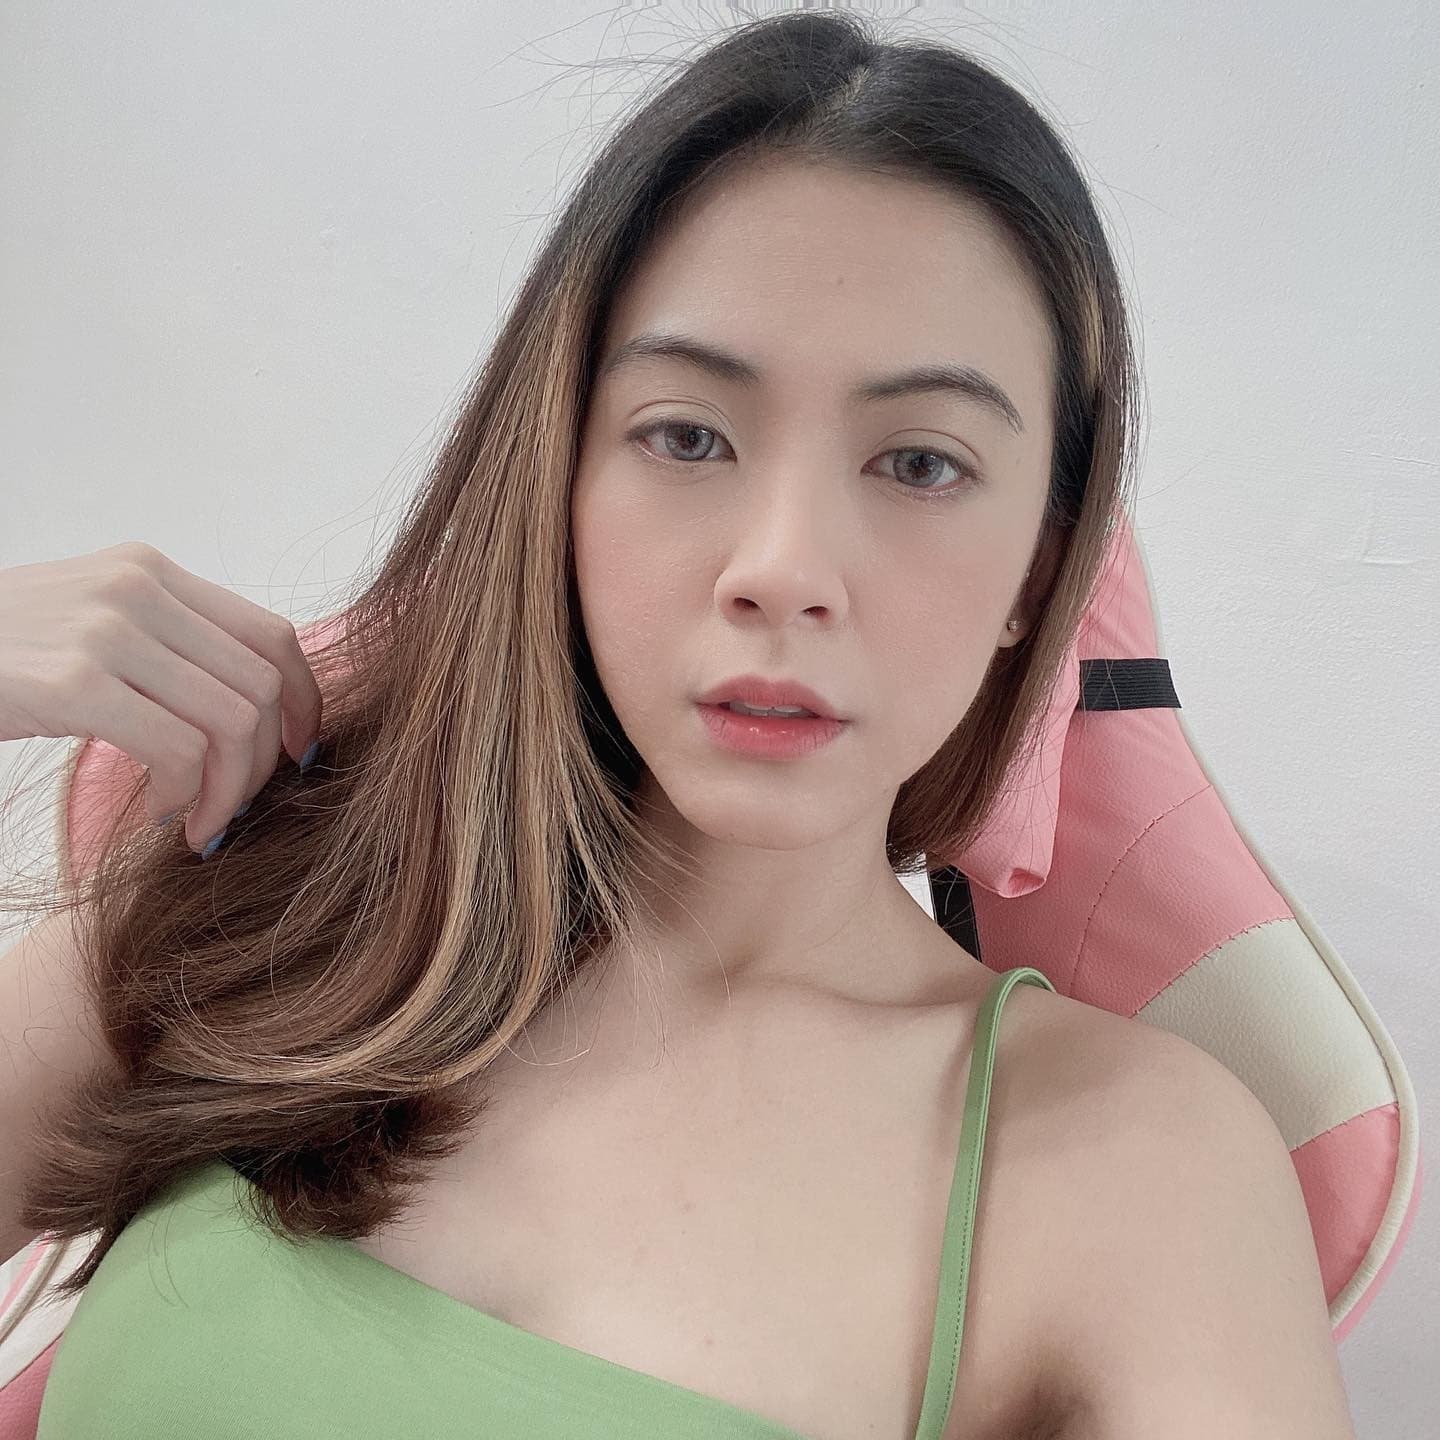 Hot Singaporean And Malaysian Girls To Follow On Instagram Season 1 Sexy For You